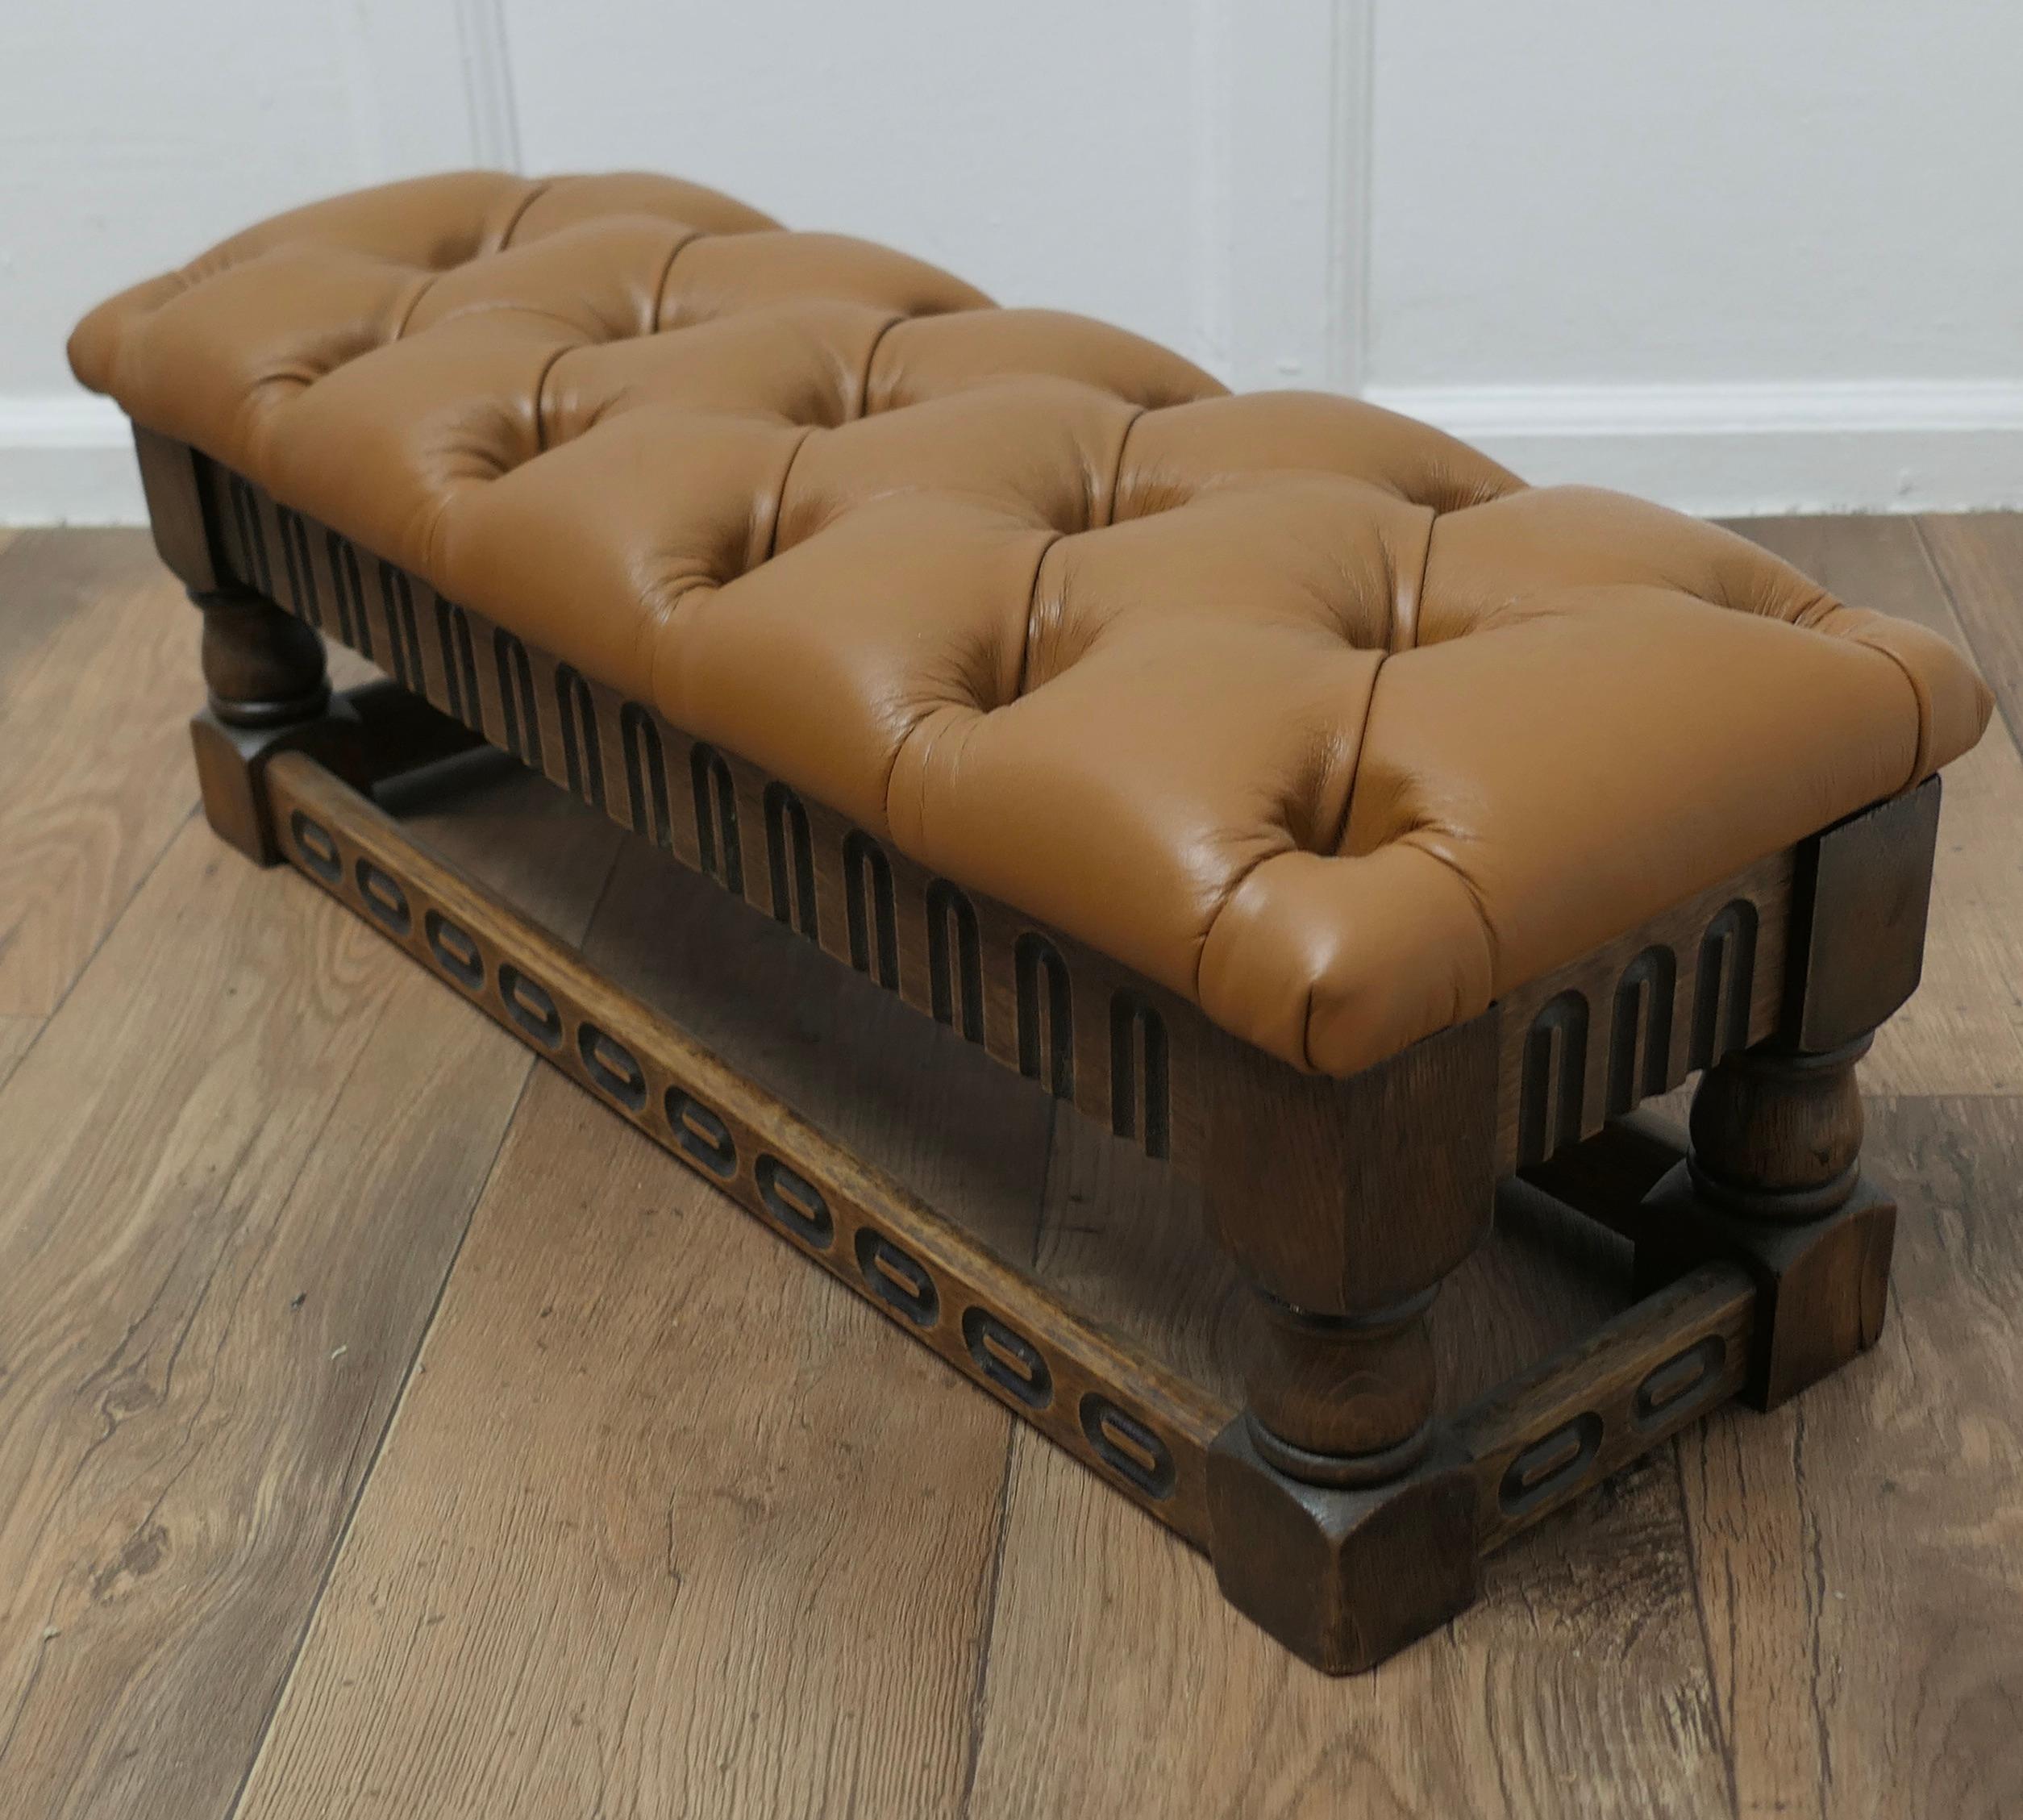 Arts and Crafts Chesterfield Buttoned Leather Oak Foot Stool

A Lovely piece, this Victorian stool is made in Oak, it stands on short Turned legs and has gothic style carving around the apron and along the stretchers, it has been upholstered in soft